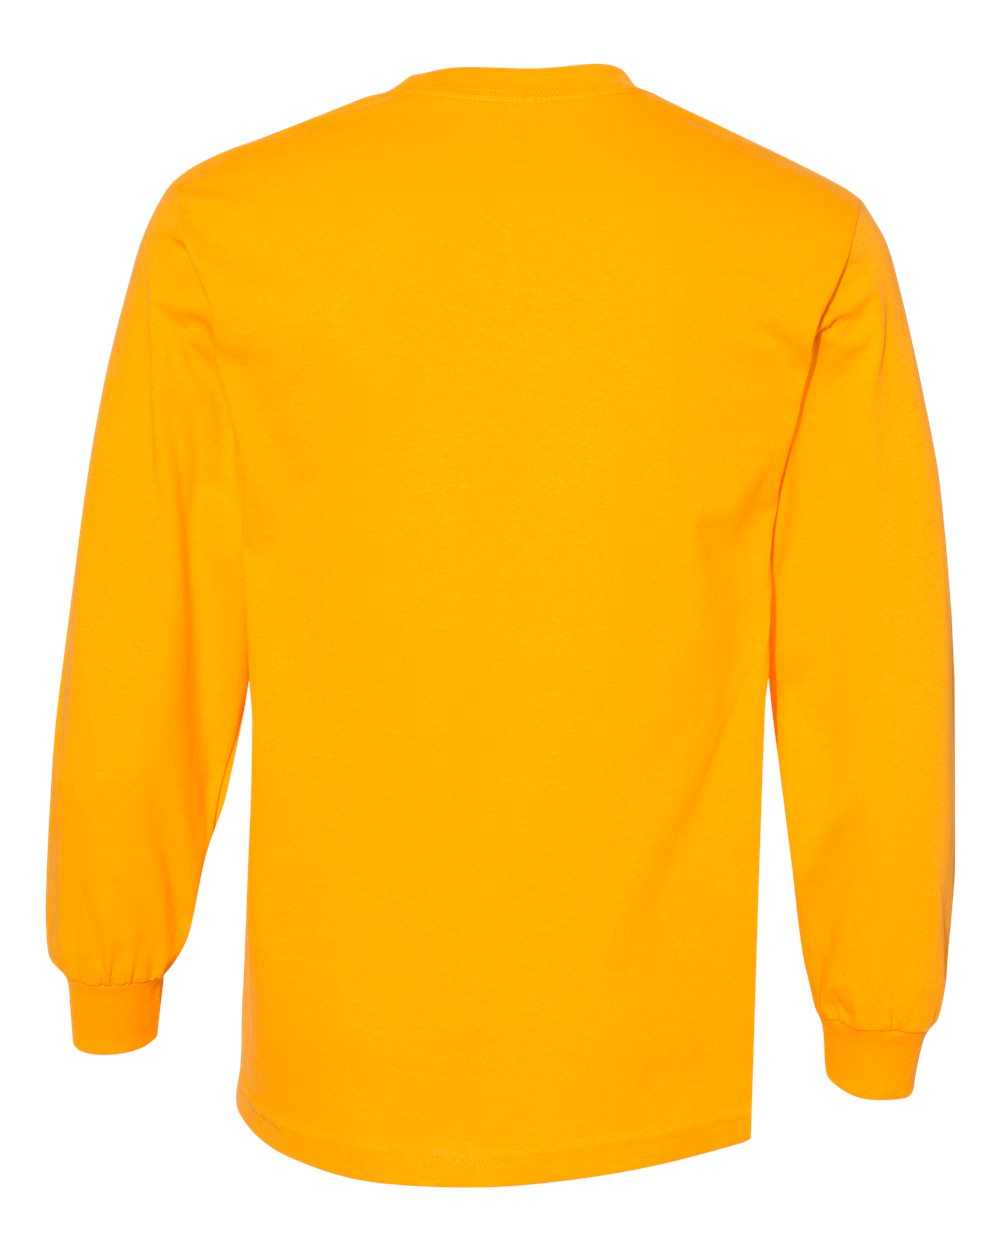 American Apparel 1304 Unisex Heavyweight Cotton Long Sleeve T-Shirt - Gold - HIT a Double